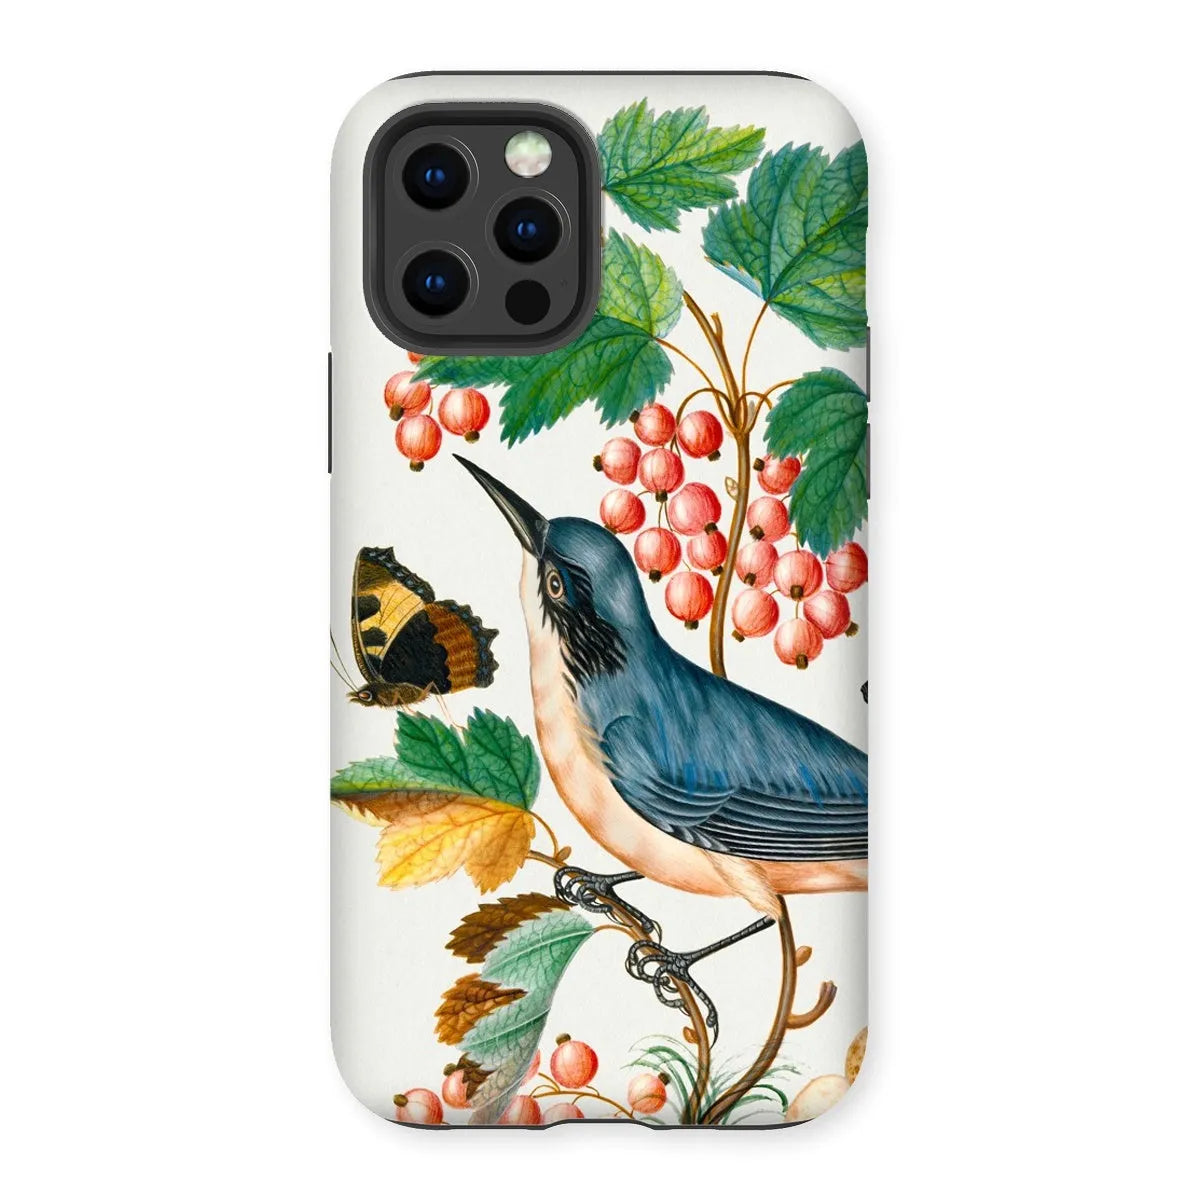 Warbler Admiral Wasps & Ants - Art Phone Case - James Bolton - Iphone 12 Pro / Matte - Mobile Phone Cases - Aesthetic